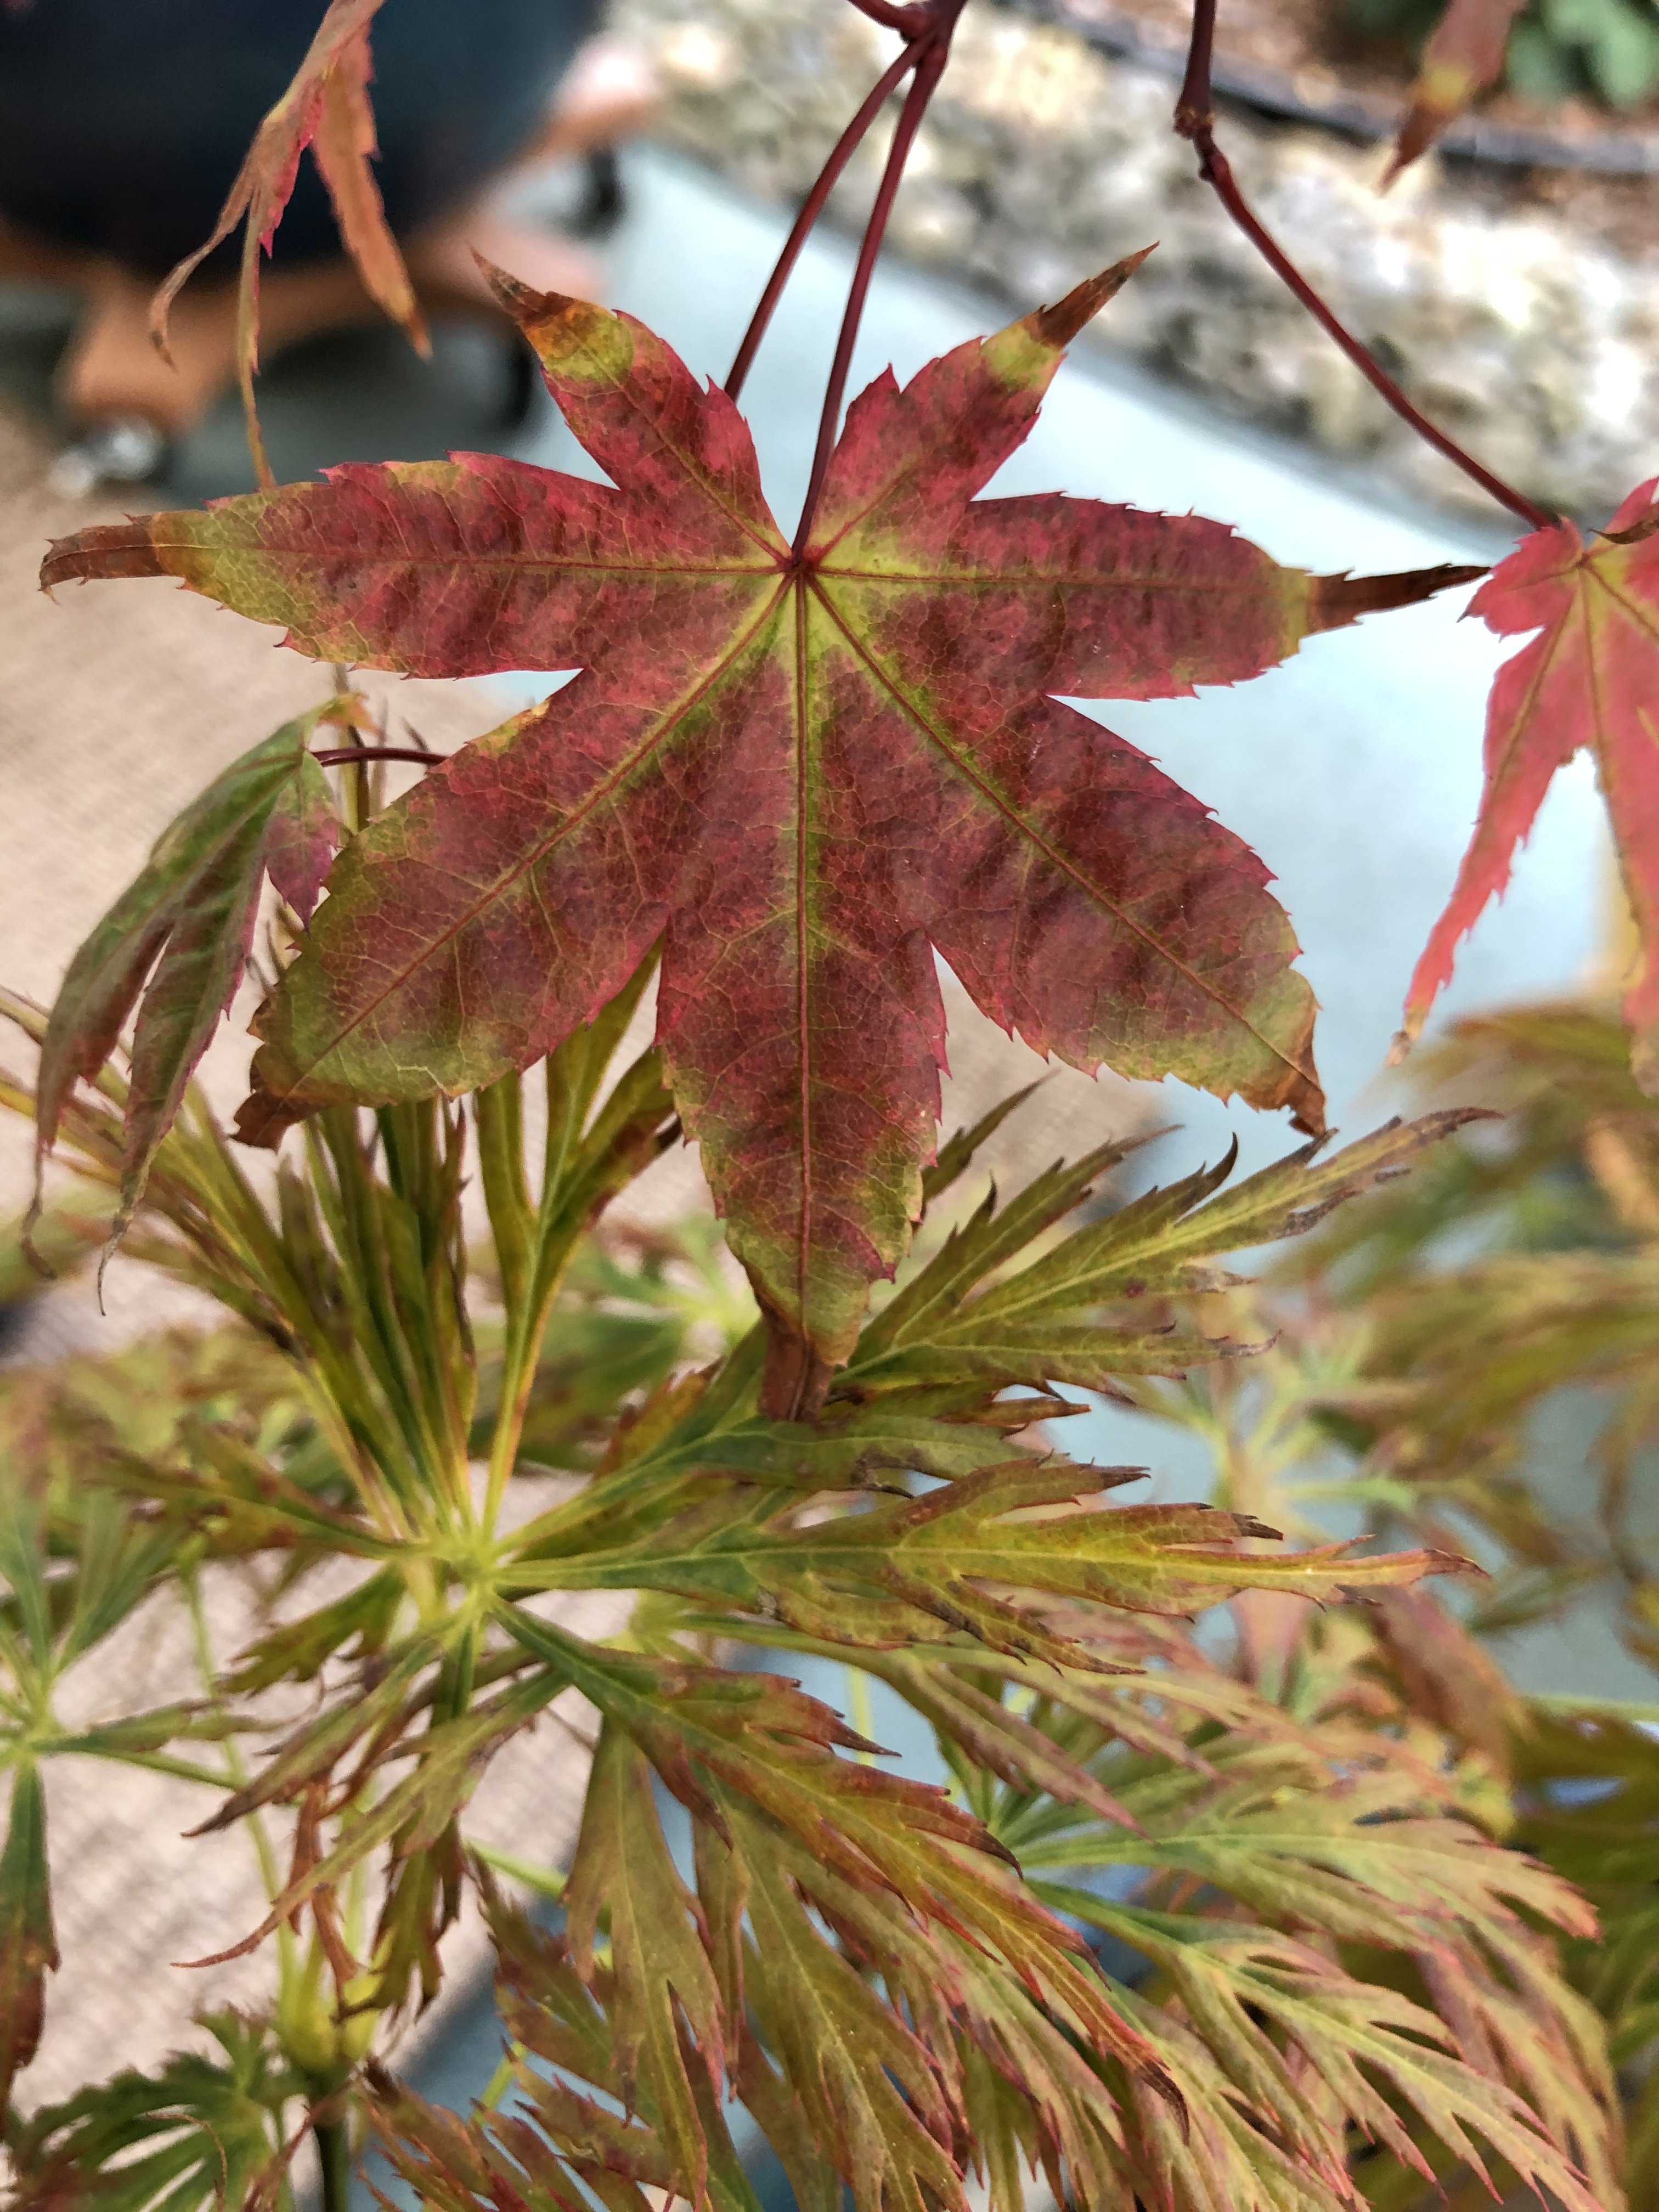 Overlapping Japanese maple leaves of different color and texture, with reds and greens melding together, some leaves are fine and ferny and another thickly lobed.    Photo date: October 13, 2019